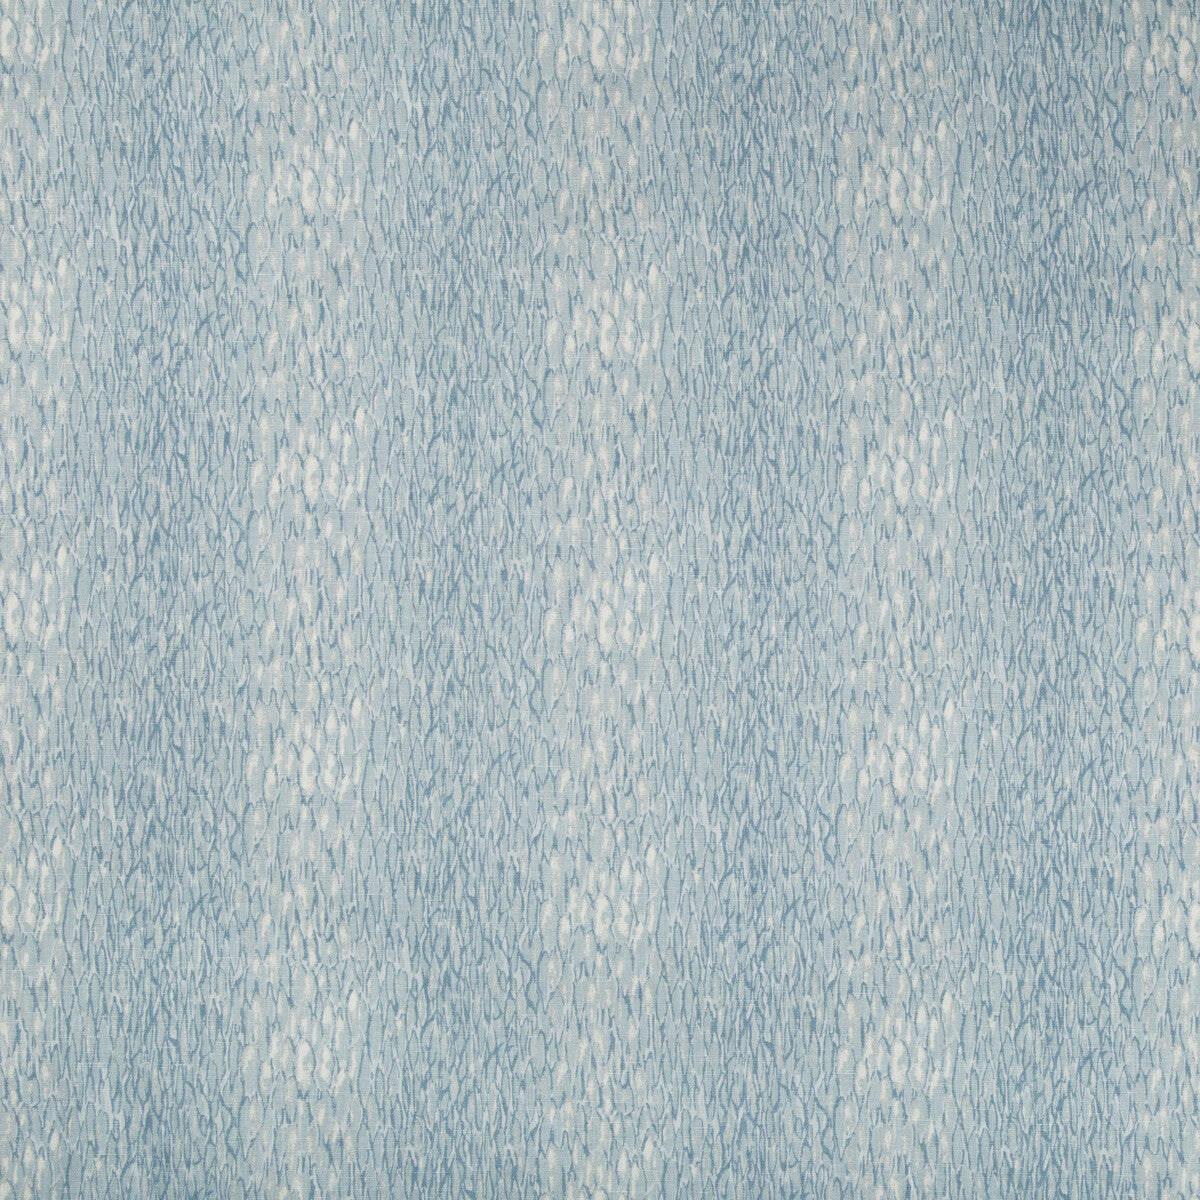 Chromis fabric in reflection color - pattern CHROMIS.15.0 - by Kravet Basics in the Jeffrey Alan Marks Oceanview collection